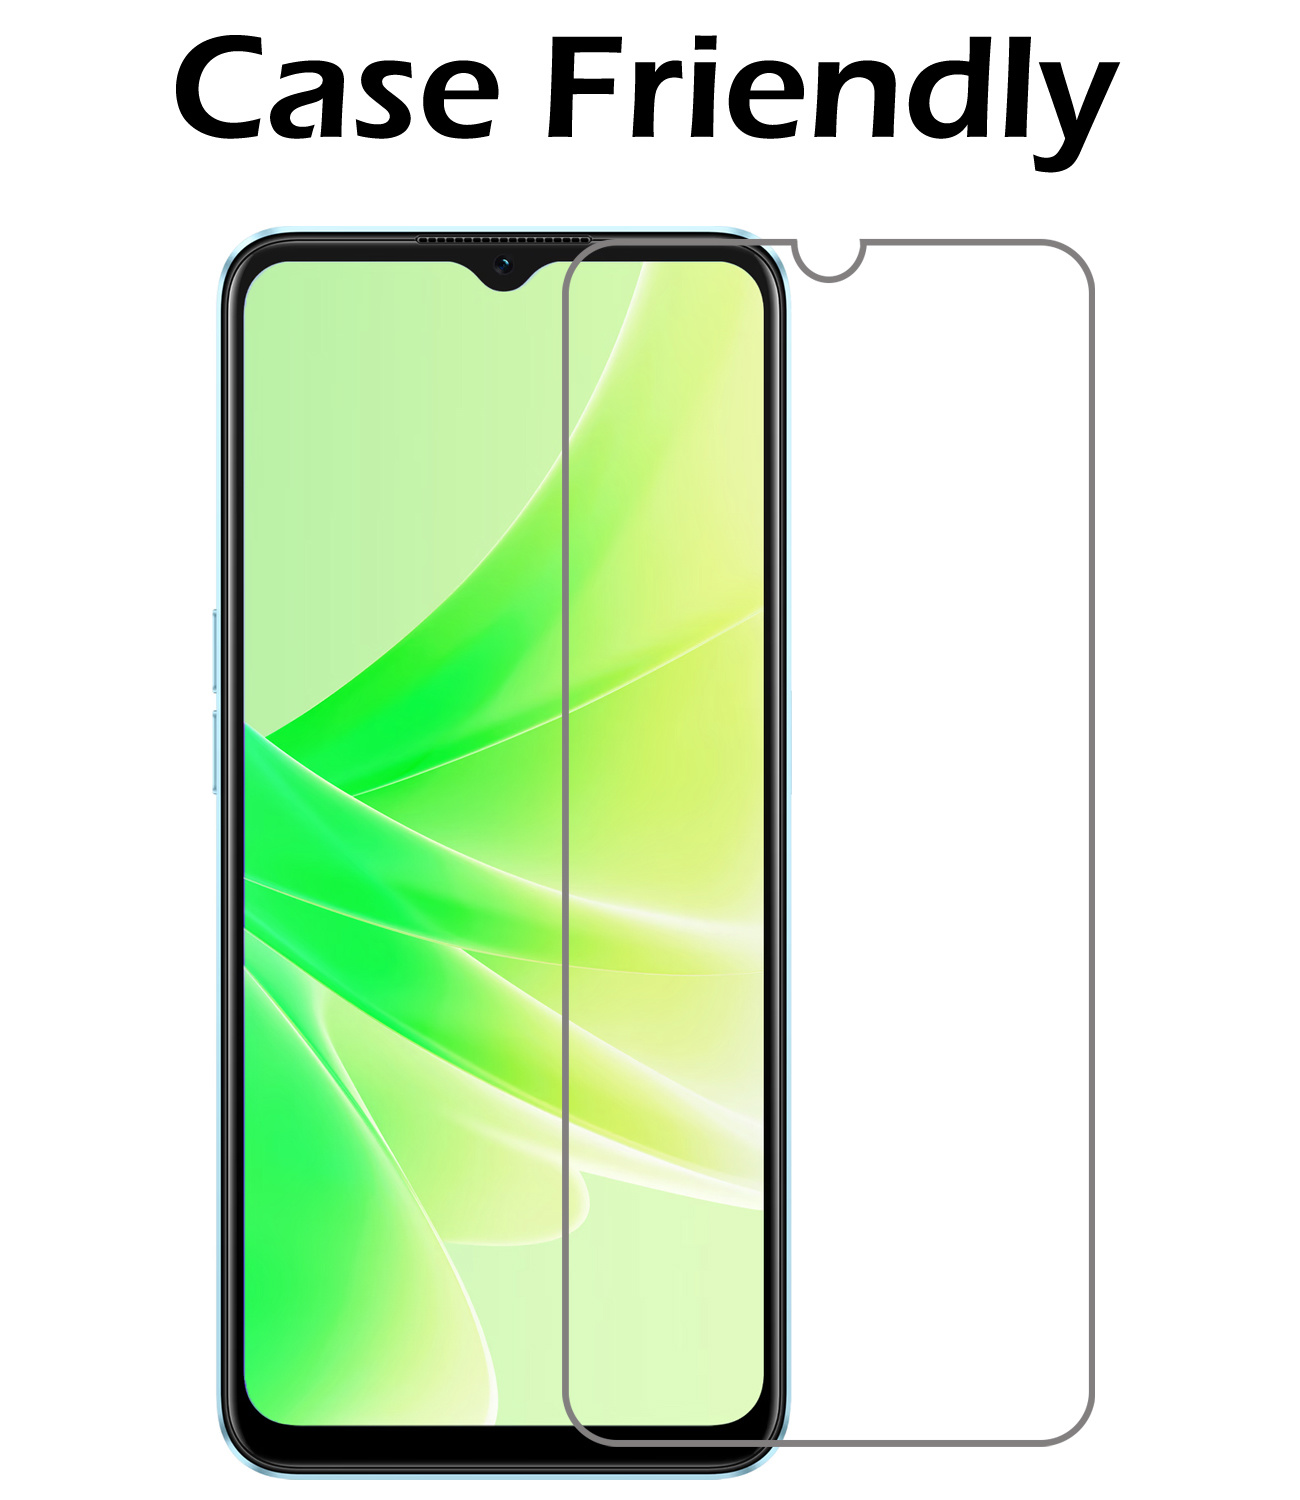 Nomfy OPPO A17 Hoesje Siliconen Case Back Cover Met Screenprotector - OPPO A17 Hoes Cover Silicone - Zwart